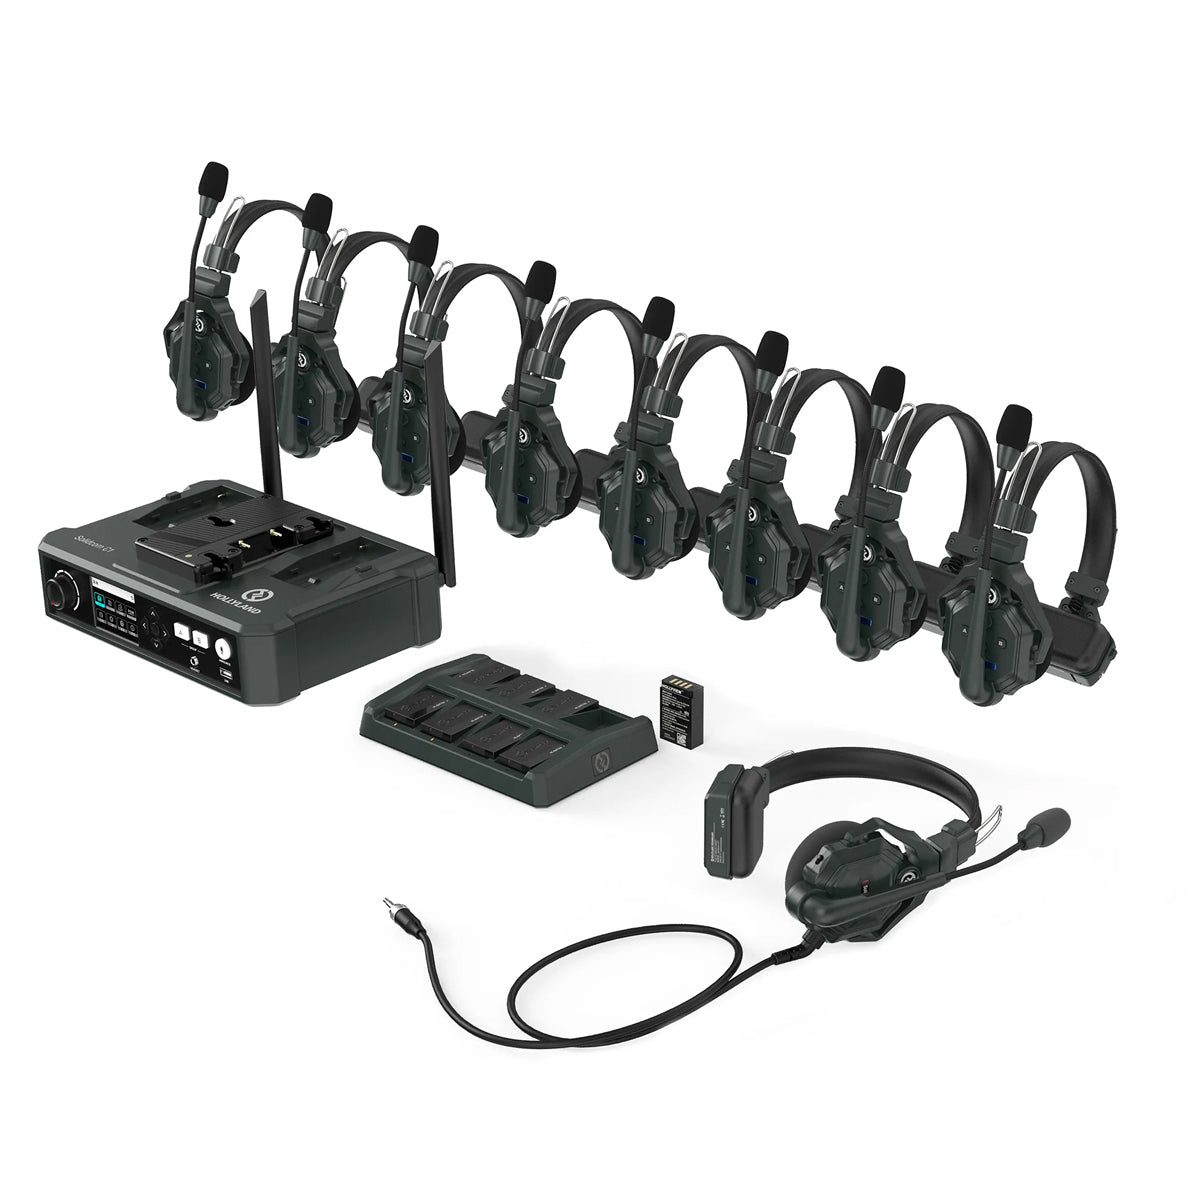 Hollyland Solidcom C1-HUB8S, Wireless Comms System, 8x Headsets, 1x Main Station, 1x Charge Station